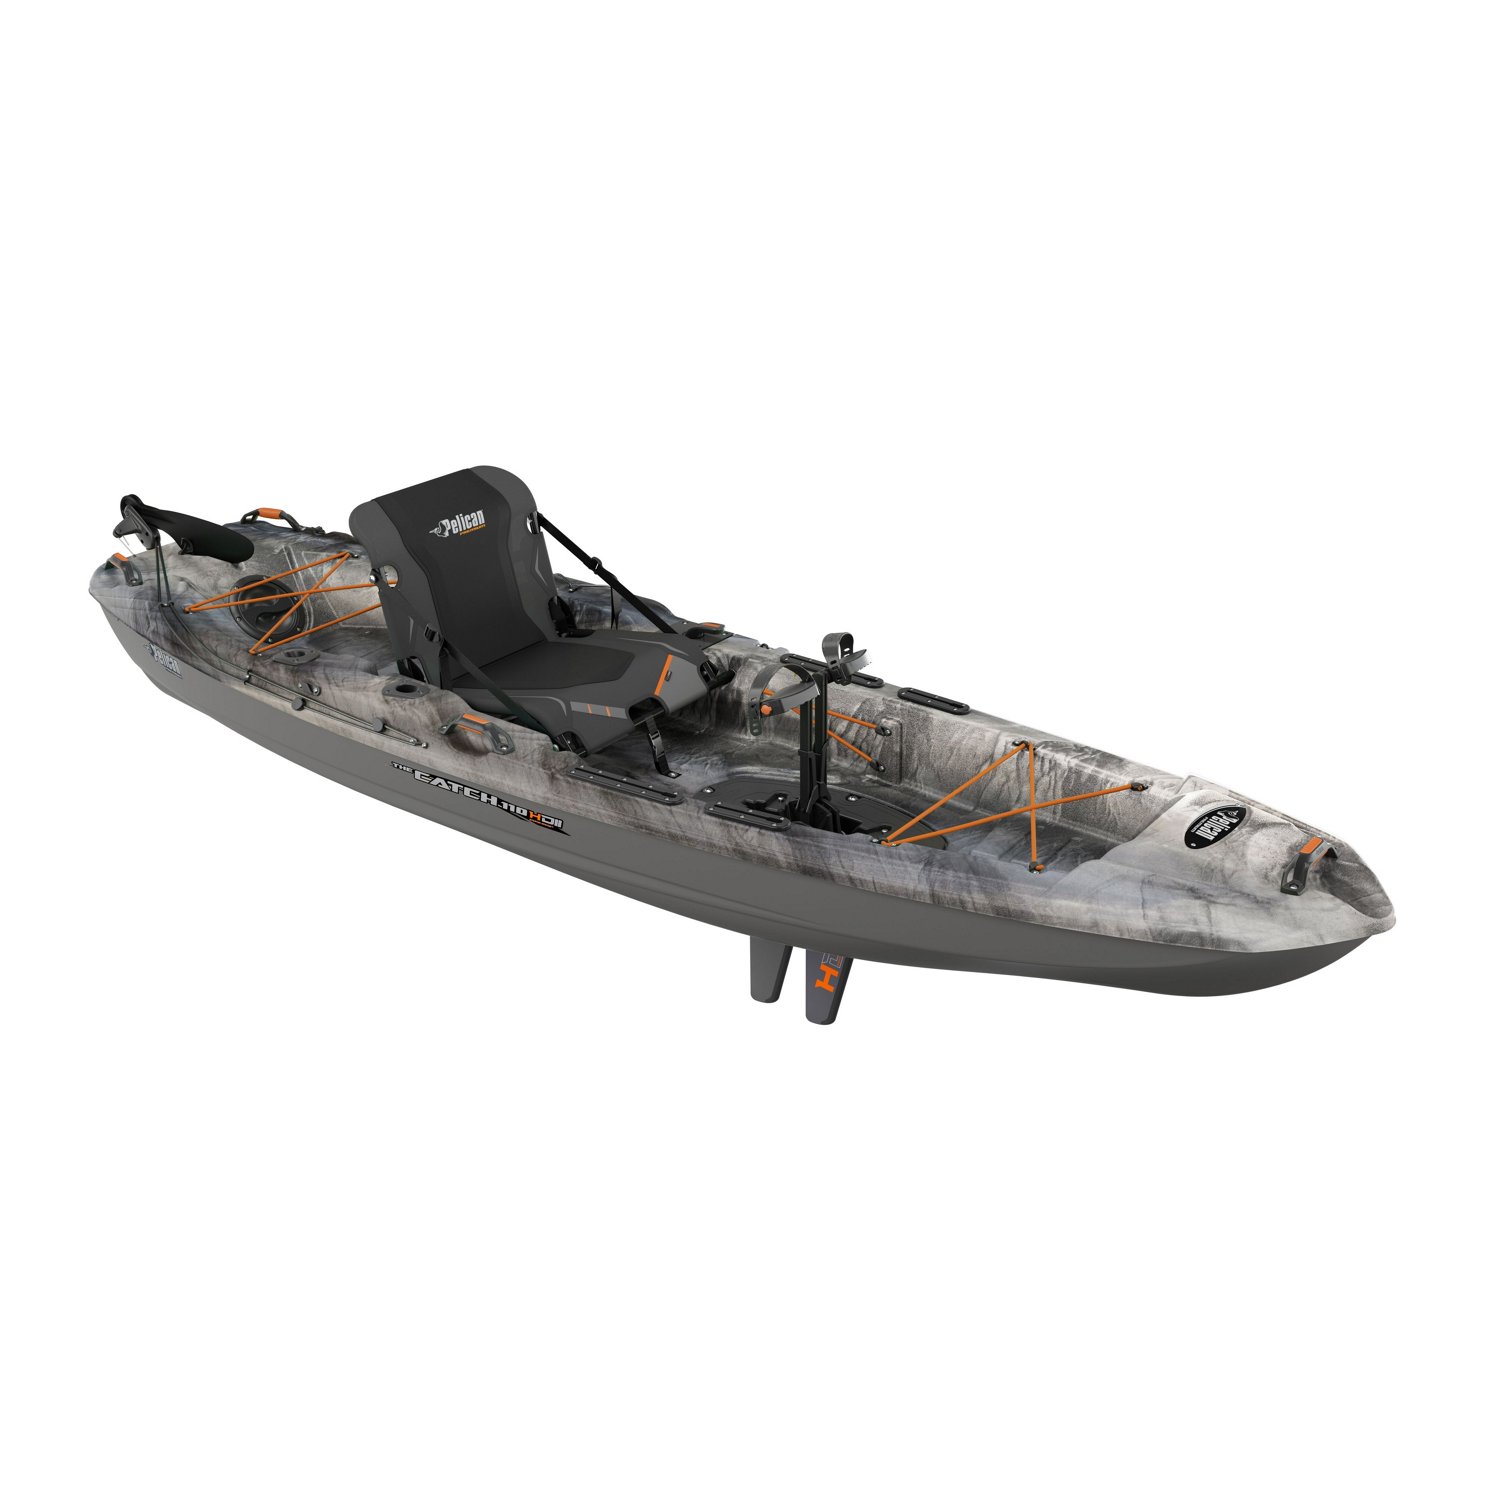 Pelican The Catch 110 HyDryve II 10 ft 6 in Pedal Drive Fishing Kayak                                                            - view number 1 selected